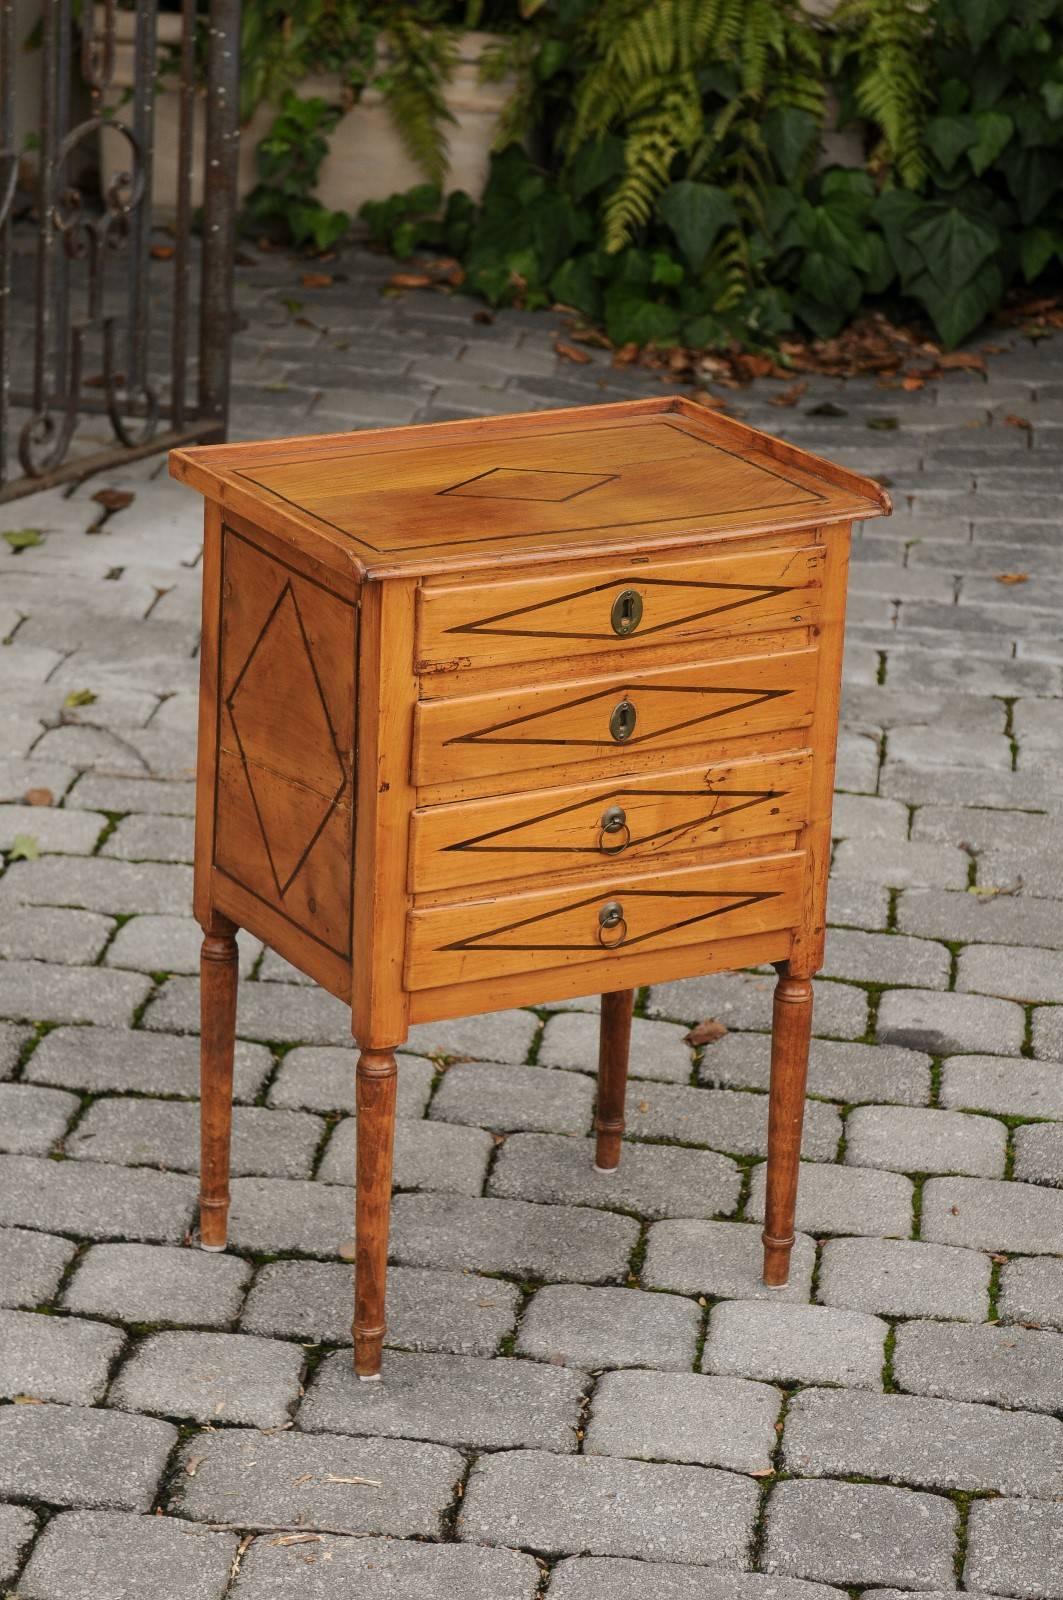 A petite French neoclassical fruitwood four-drawer commode from the early 19th century. This small size French commode from the 1820s features a three-quarter wooden gallery sitting atop four veneered drawers. These drawers are adorned with